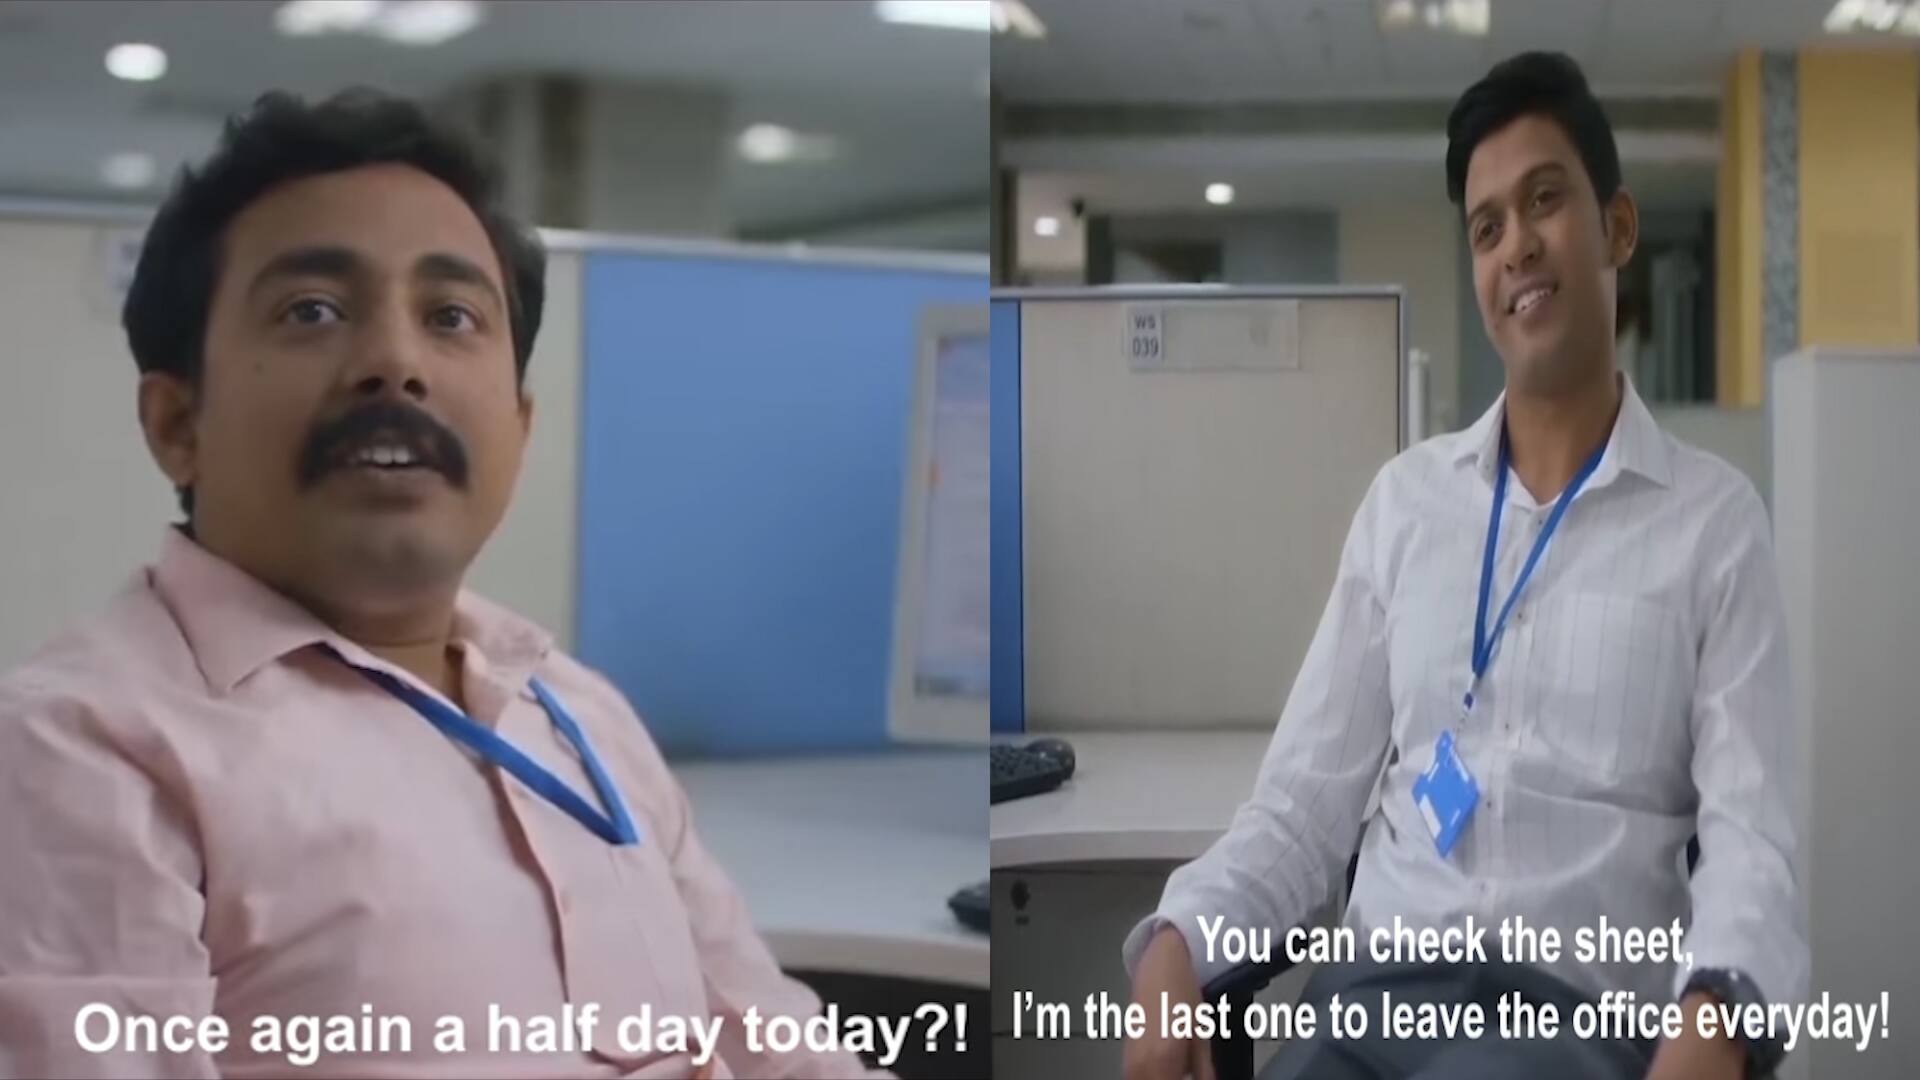 This hilarious web-series video highlights woes that stress out IT professionals